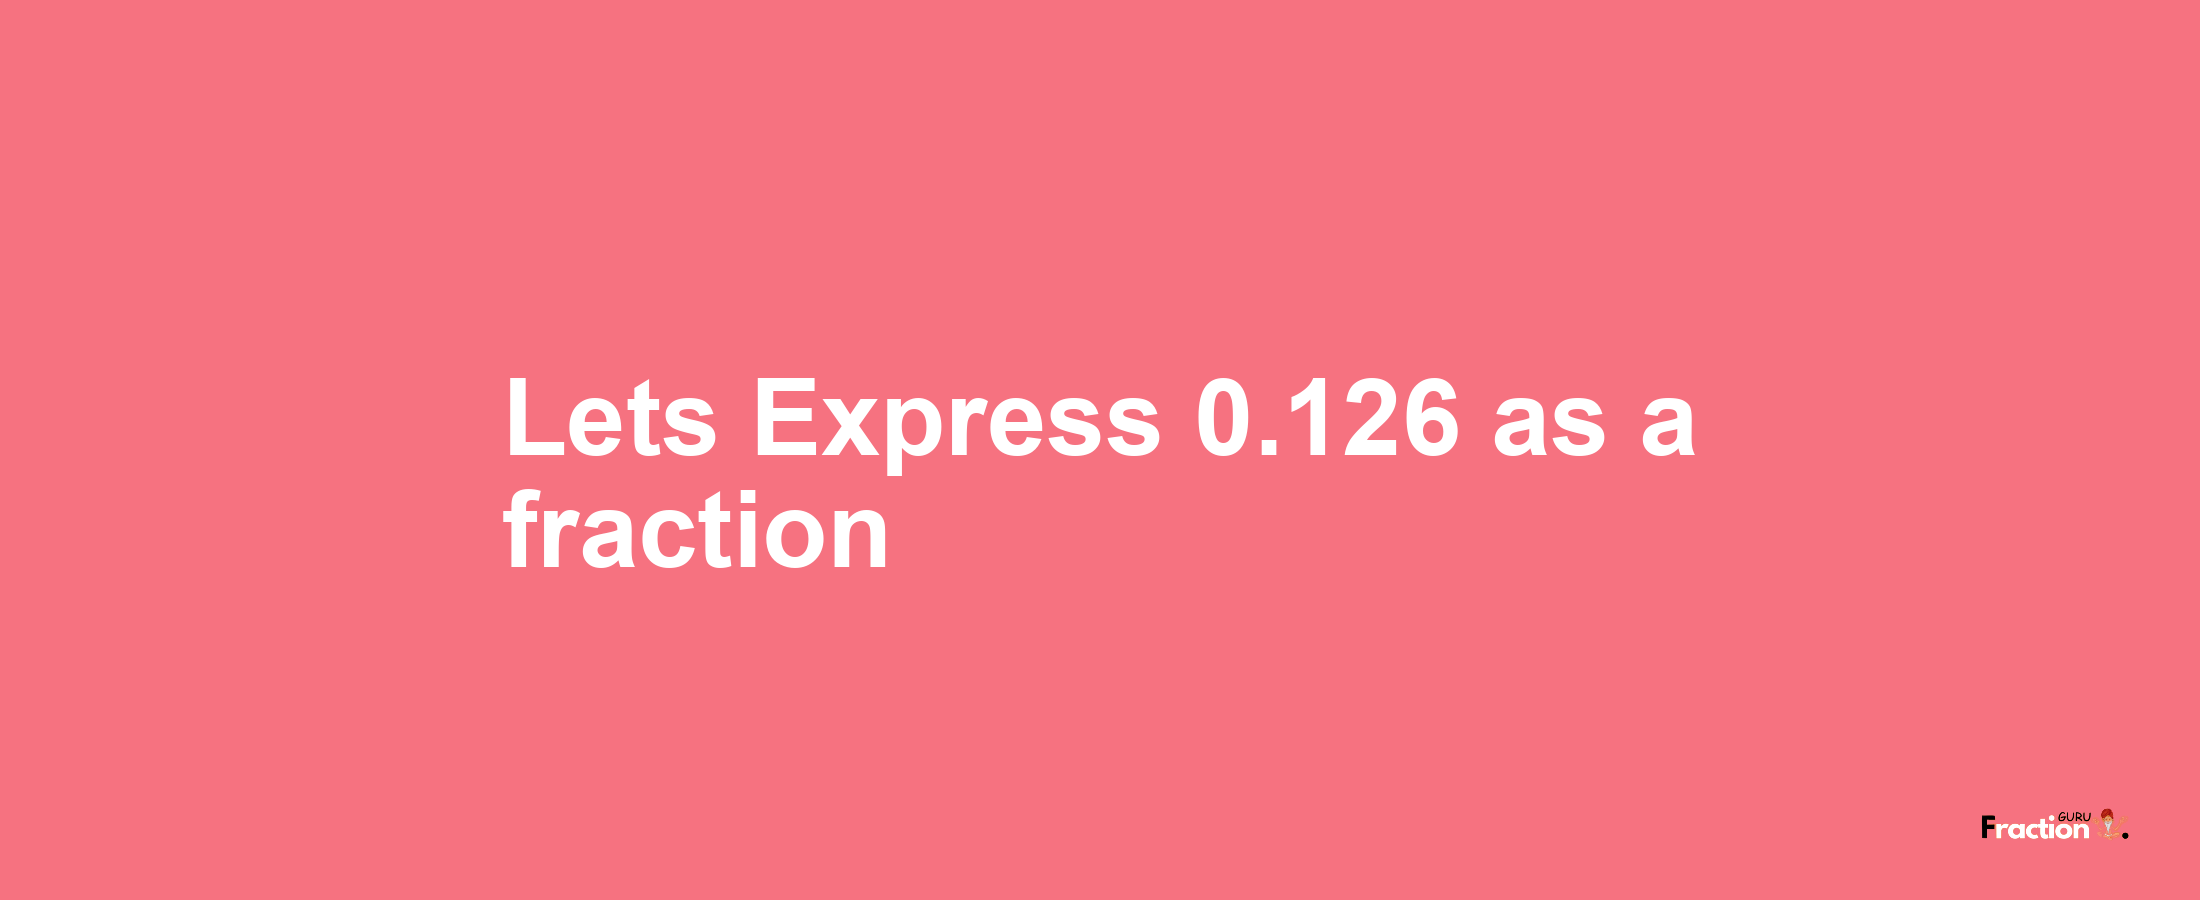 Lets Express 0.126 as afraction